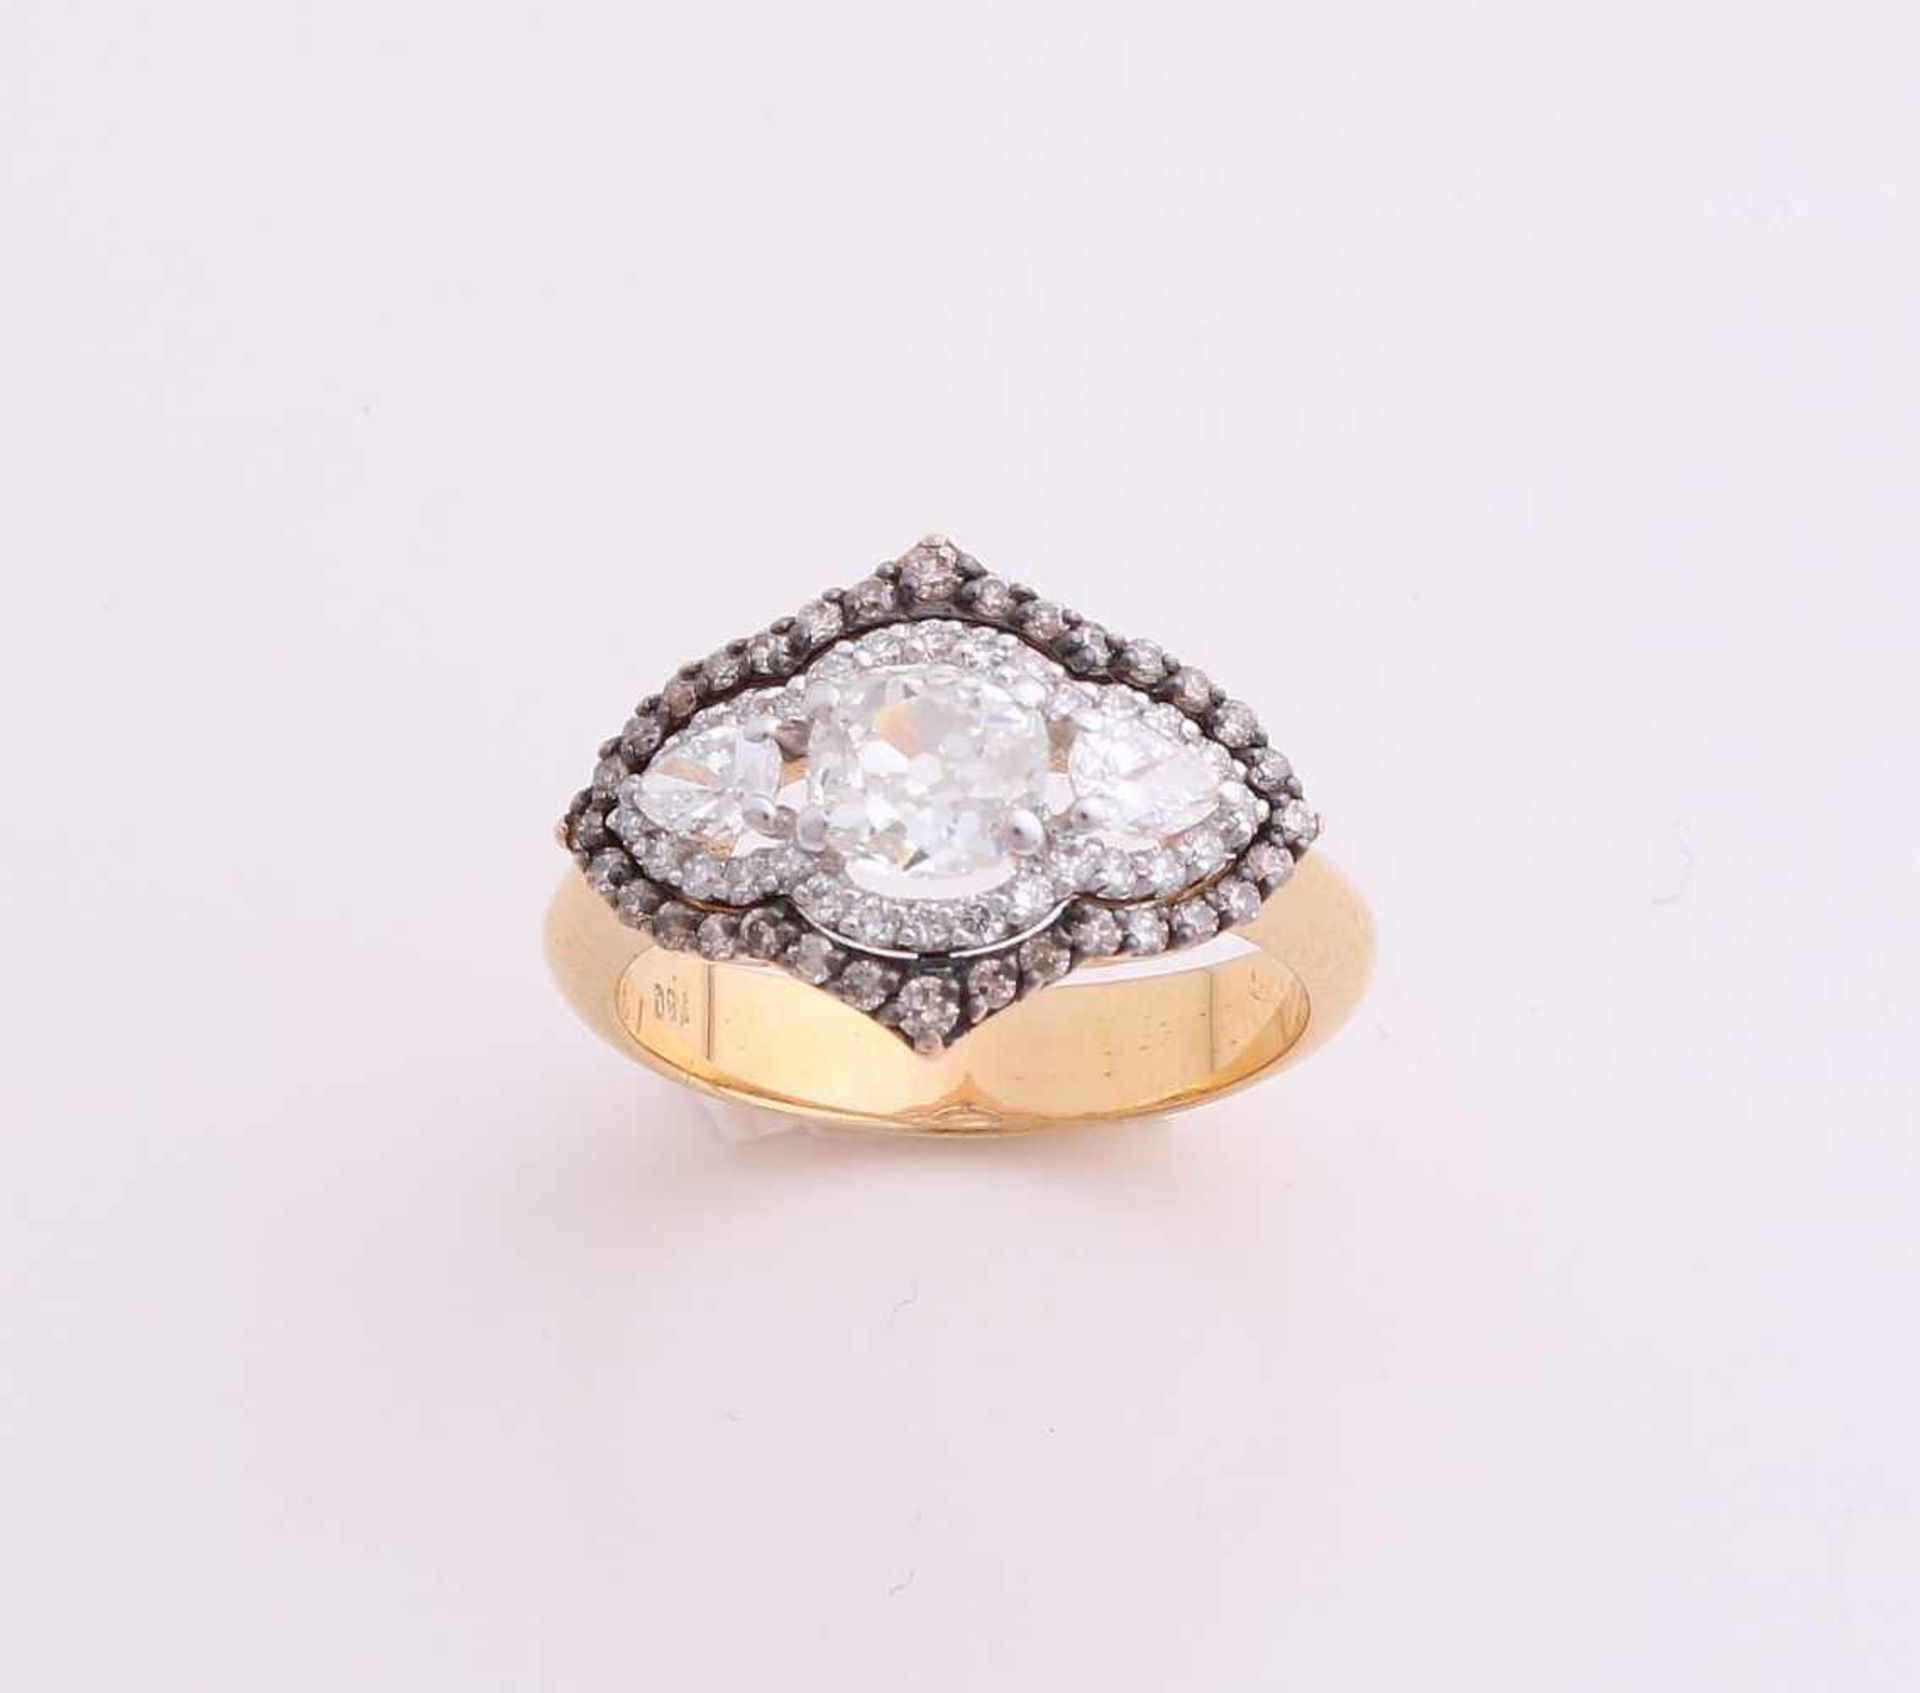 Particular yellow gold ring, 750/000, with diamonds. Ring in the middle an old pillow-shaped cut